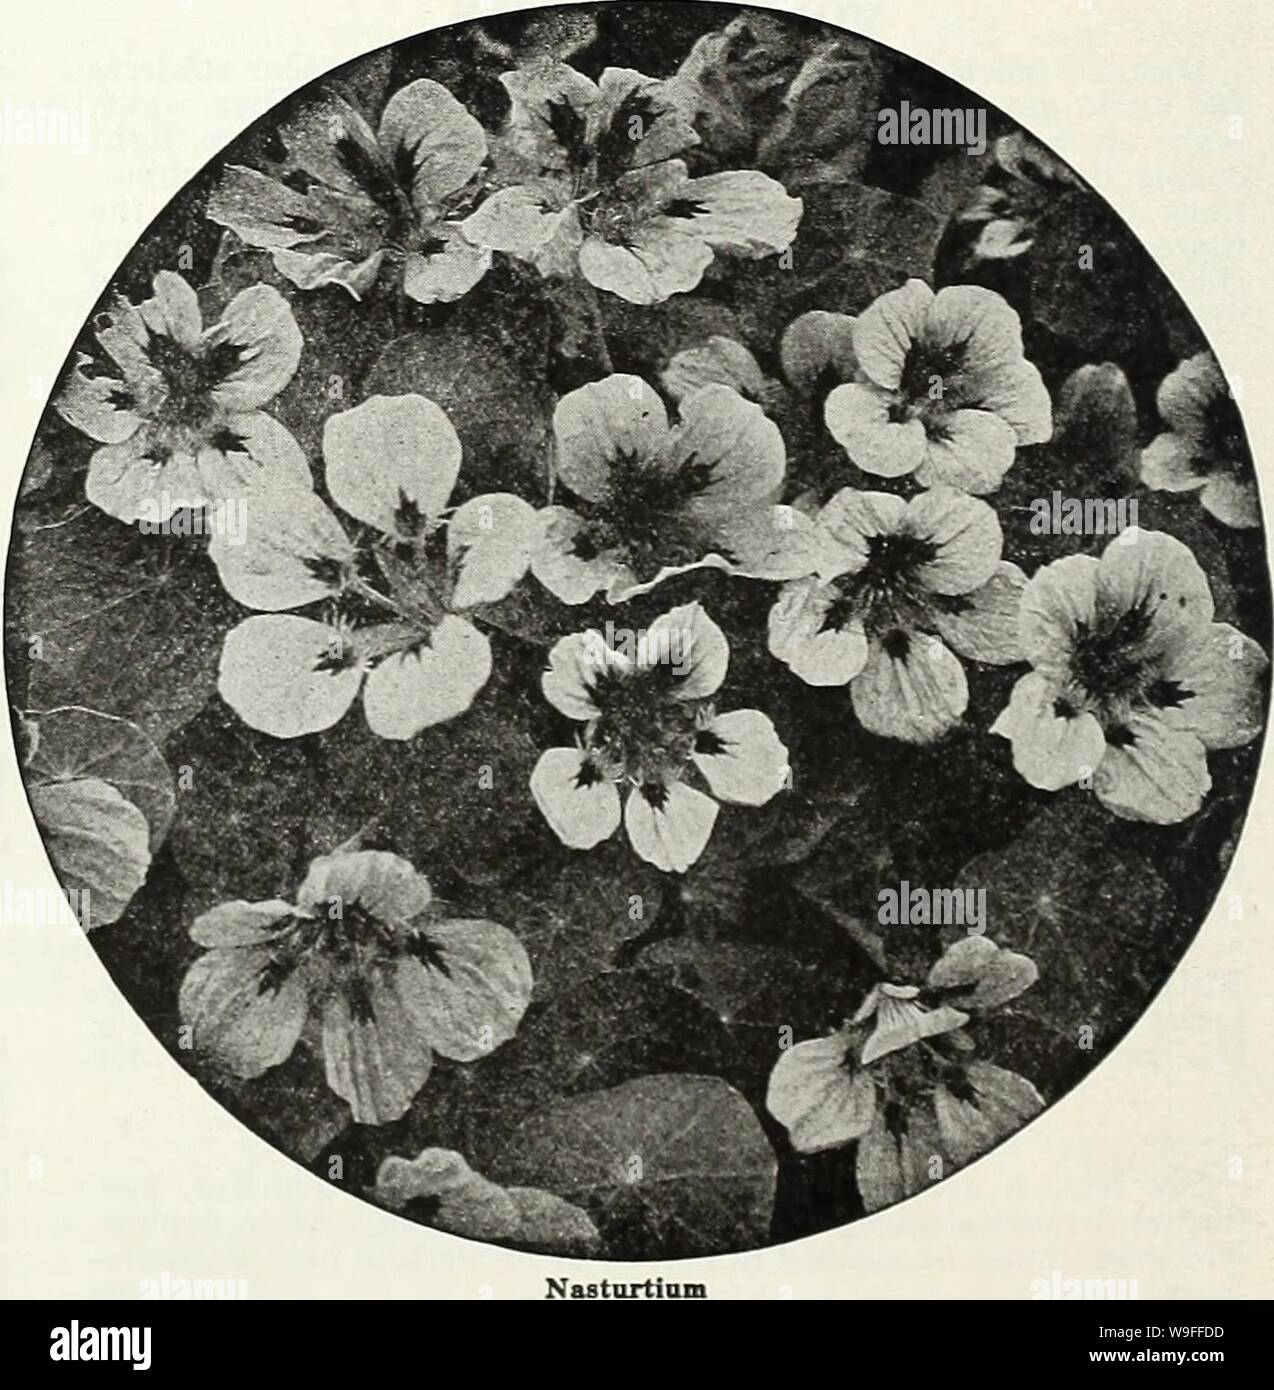 Archive image from page 37 of Currie's garden annual  spring. Currie's garden annual : spring 1936 61st year  curriesgardenann19curr 2 Year: 1936 ( Page 32 CURRIE BROTHERS CO., MILWAUKEE, WIS. Currie's Nasturtiums Double Dwarf Nasturtiums Novelties for 1936 DWARF DOUBLE GEM MIXTURE This mixture is composed of an even- ly balanced range of cheerful colors on dwarf, compact plants. We believe that for general use this strain will be- come more popular than the Gleams. The plants are really dwarf, totally without runners. The good sized flow- ers are double and sweet scented and cover the little Stock Photo